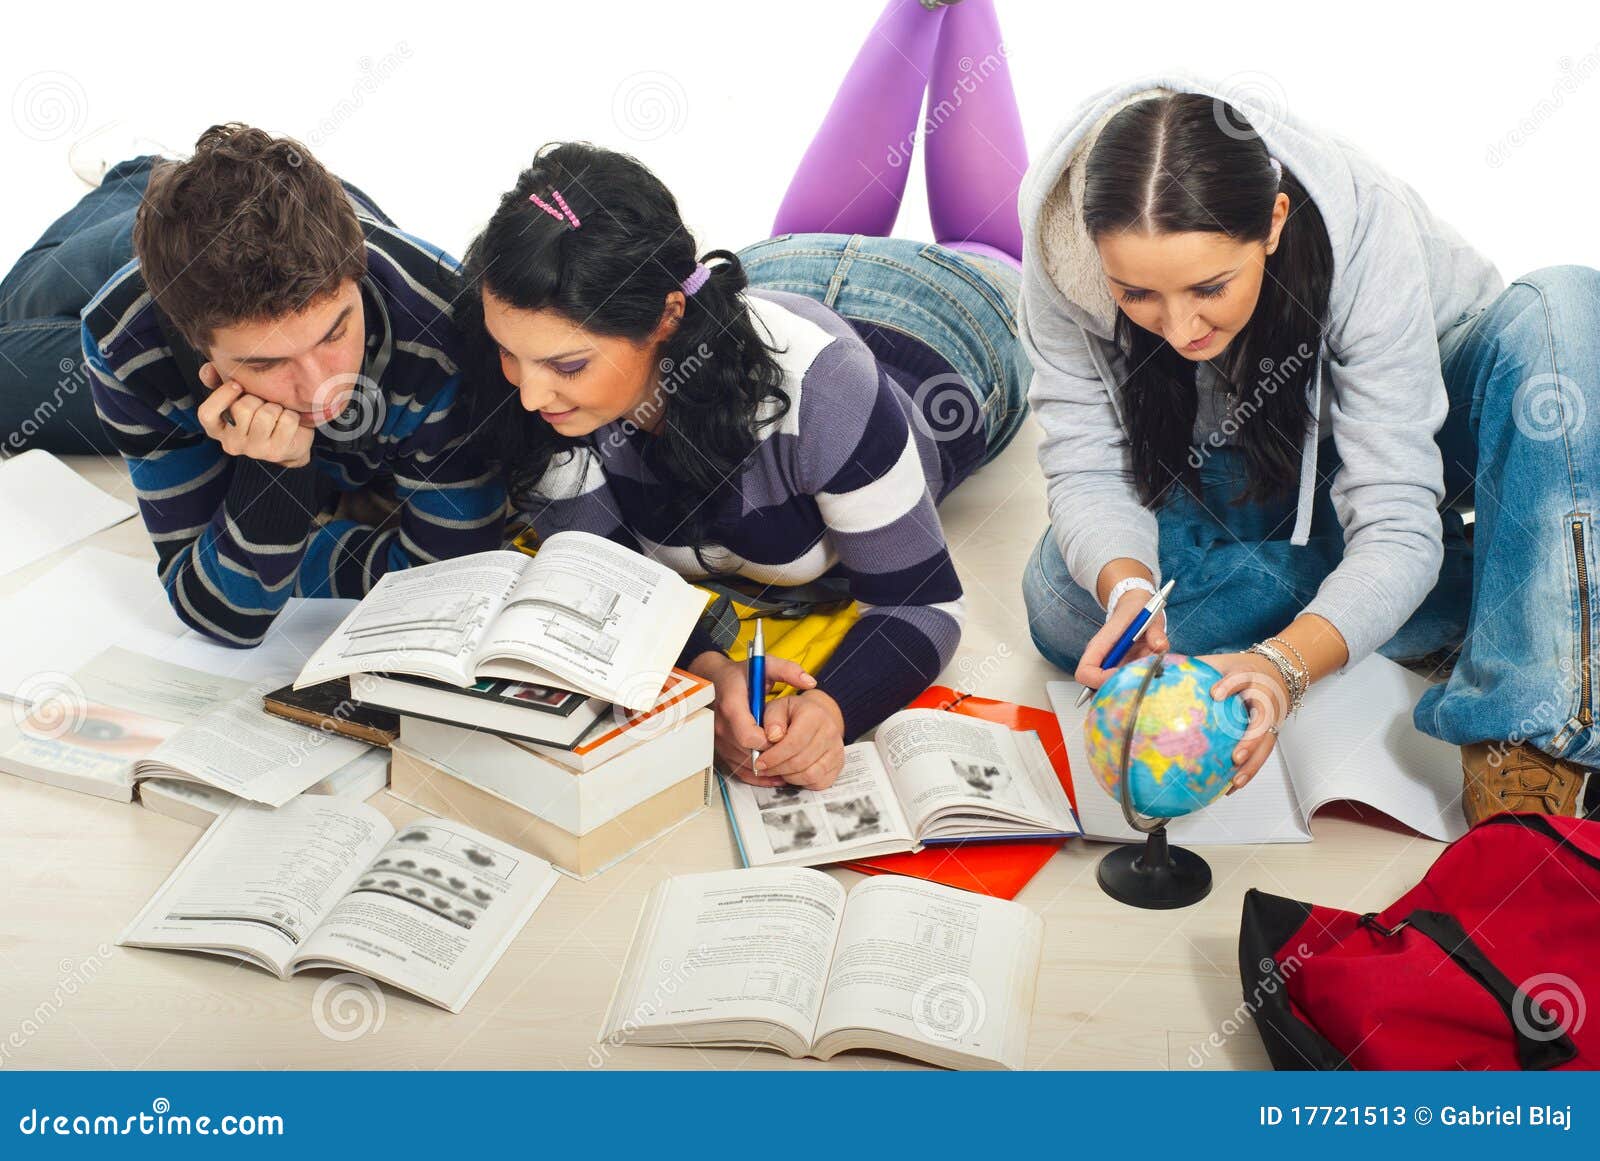 students studying together 17721513